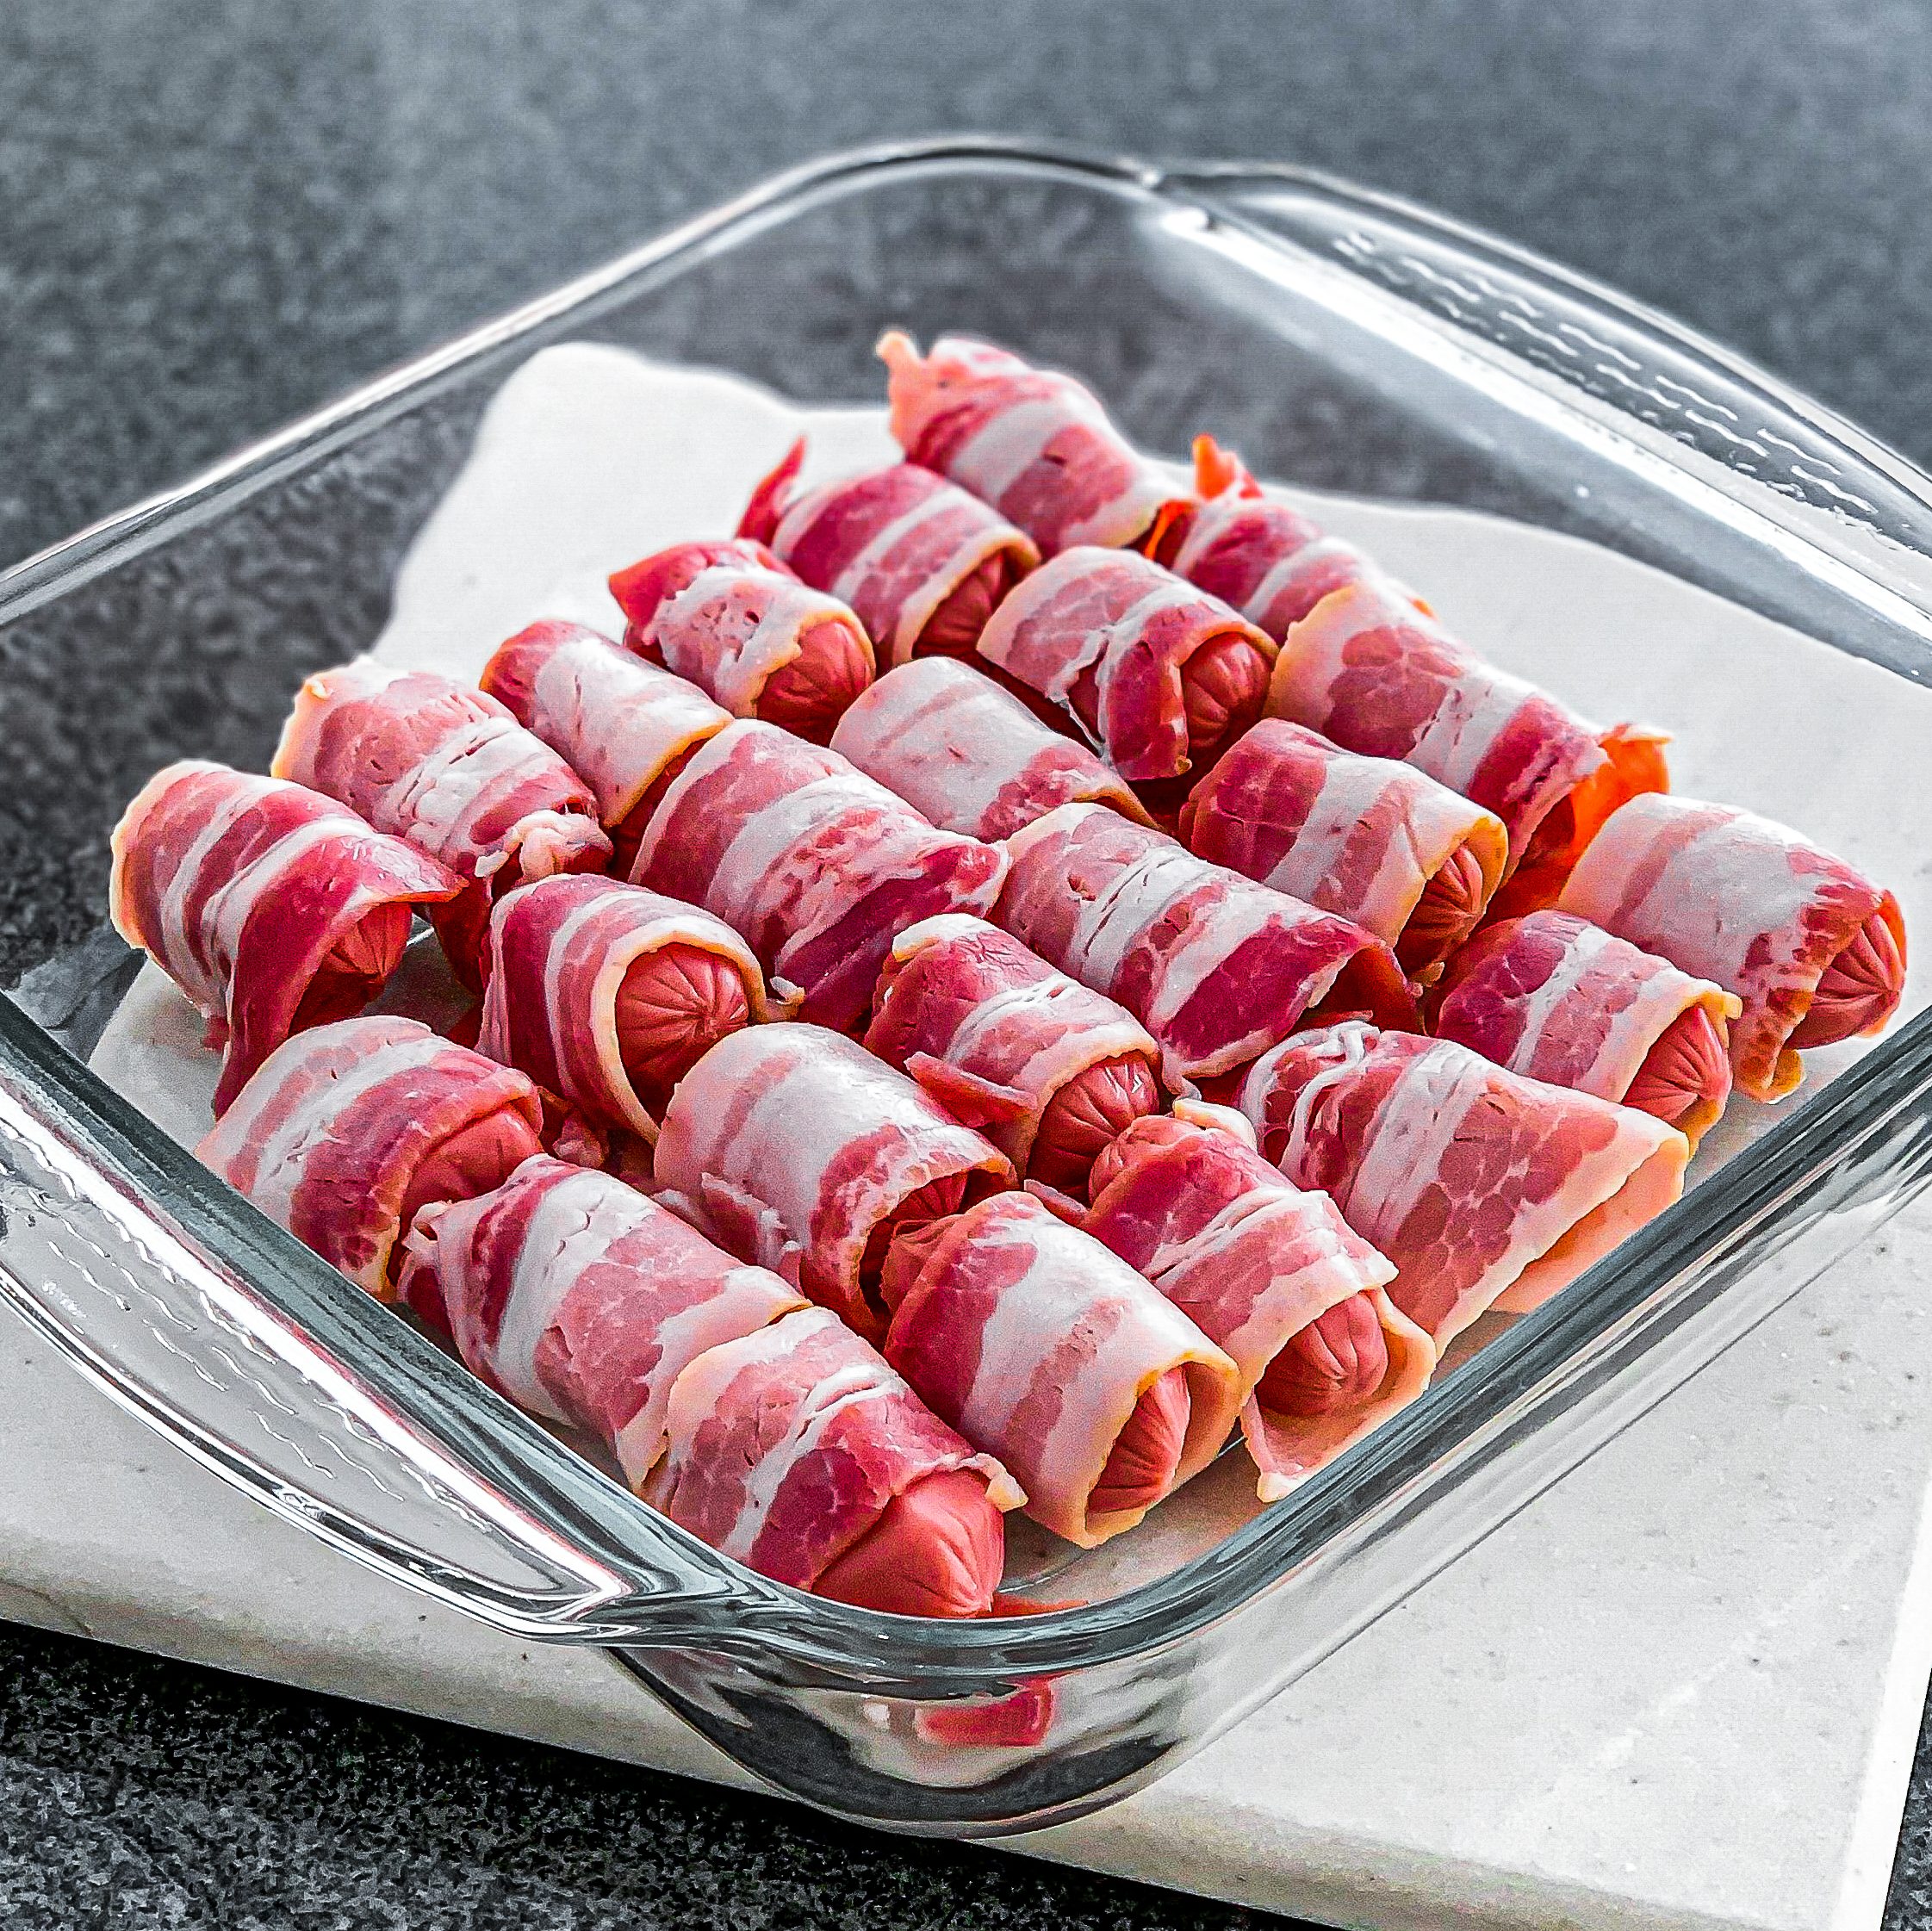 Arrange each one of the bacon-wrapped sausages into a baking dish.